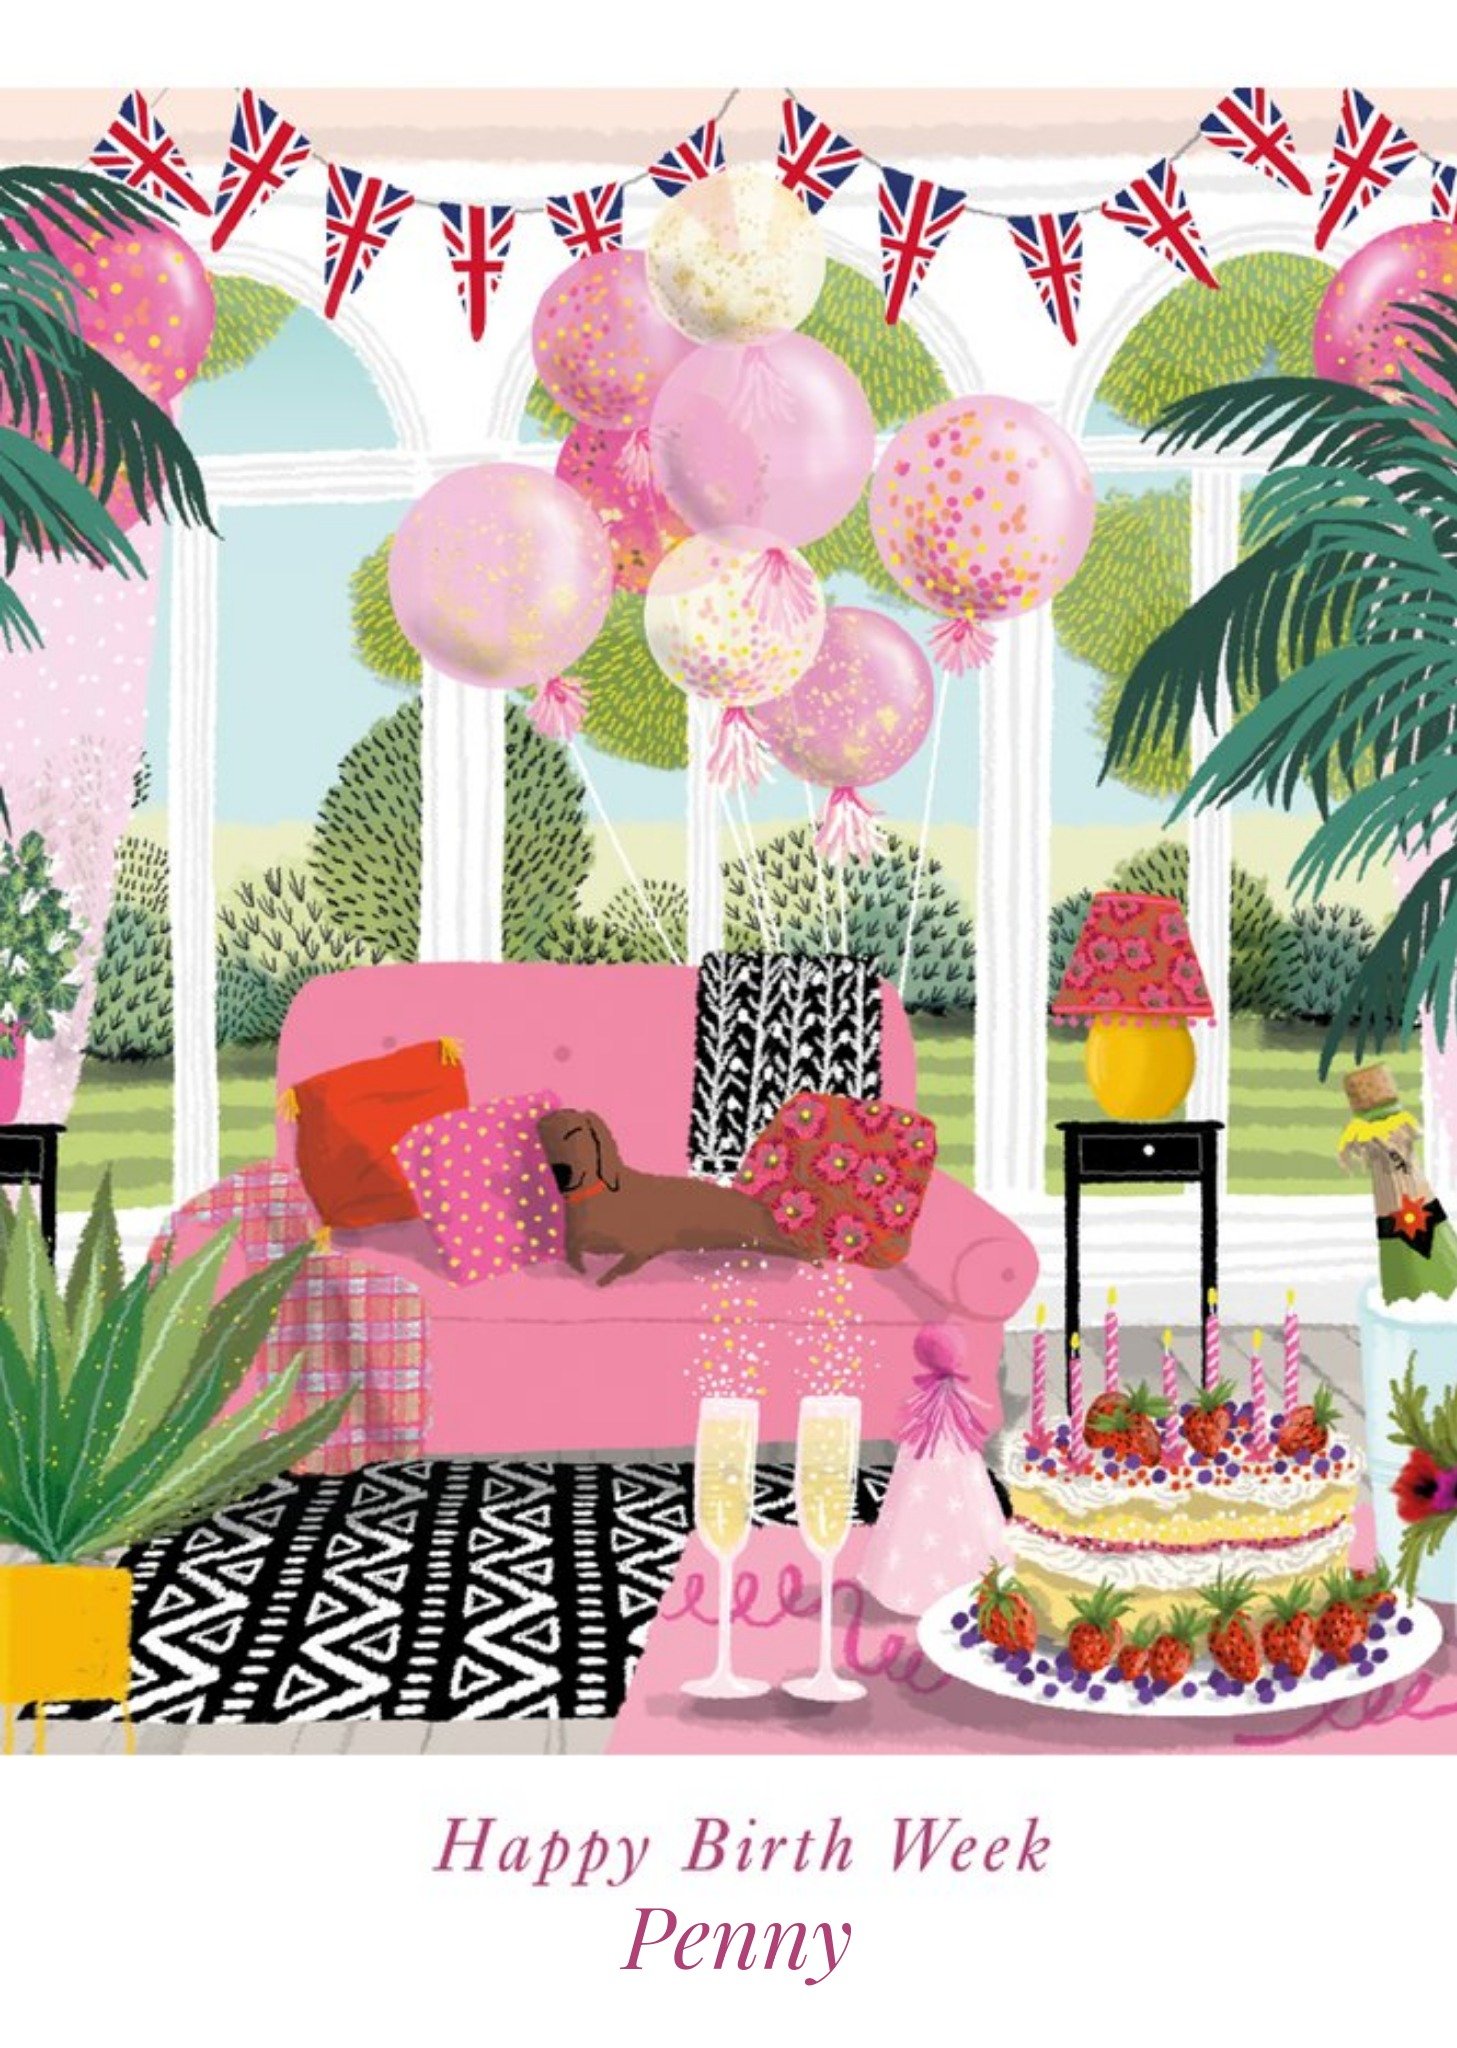 Moonpig British Themed Illustration Of A Room Decorated With Buntings And Balloons Birth Week Birthd